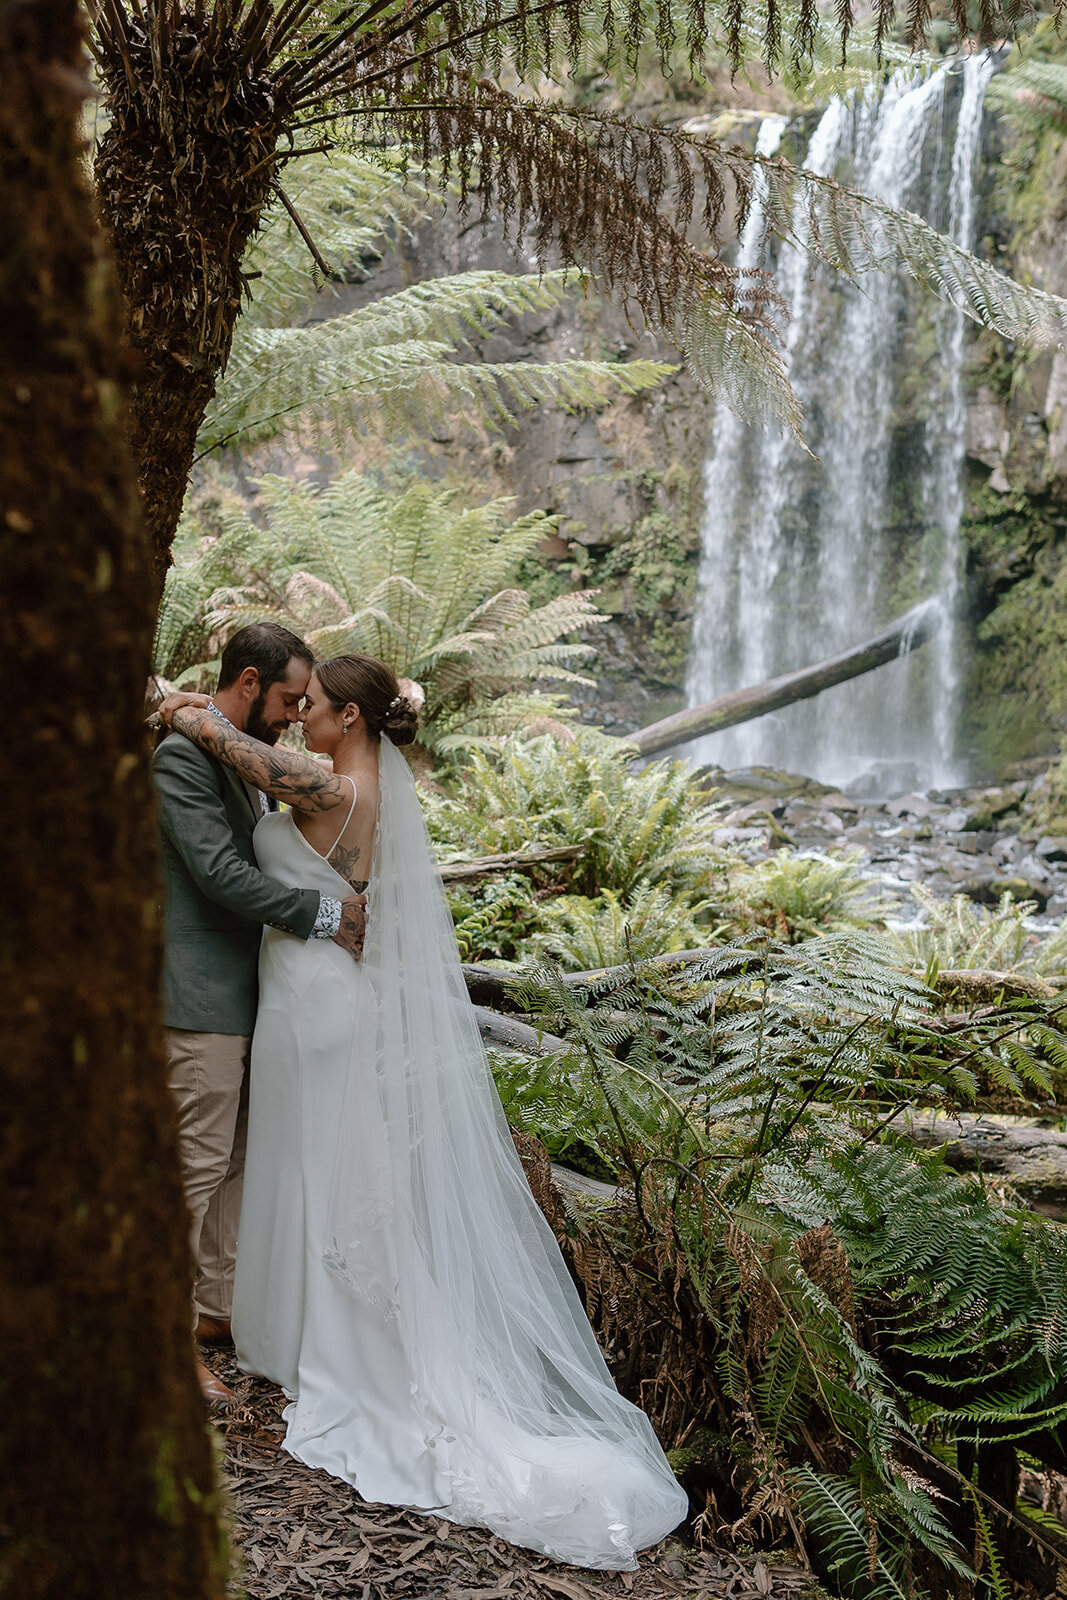 Stacey&Cory-Coast&Pines-307